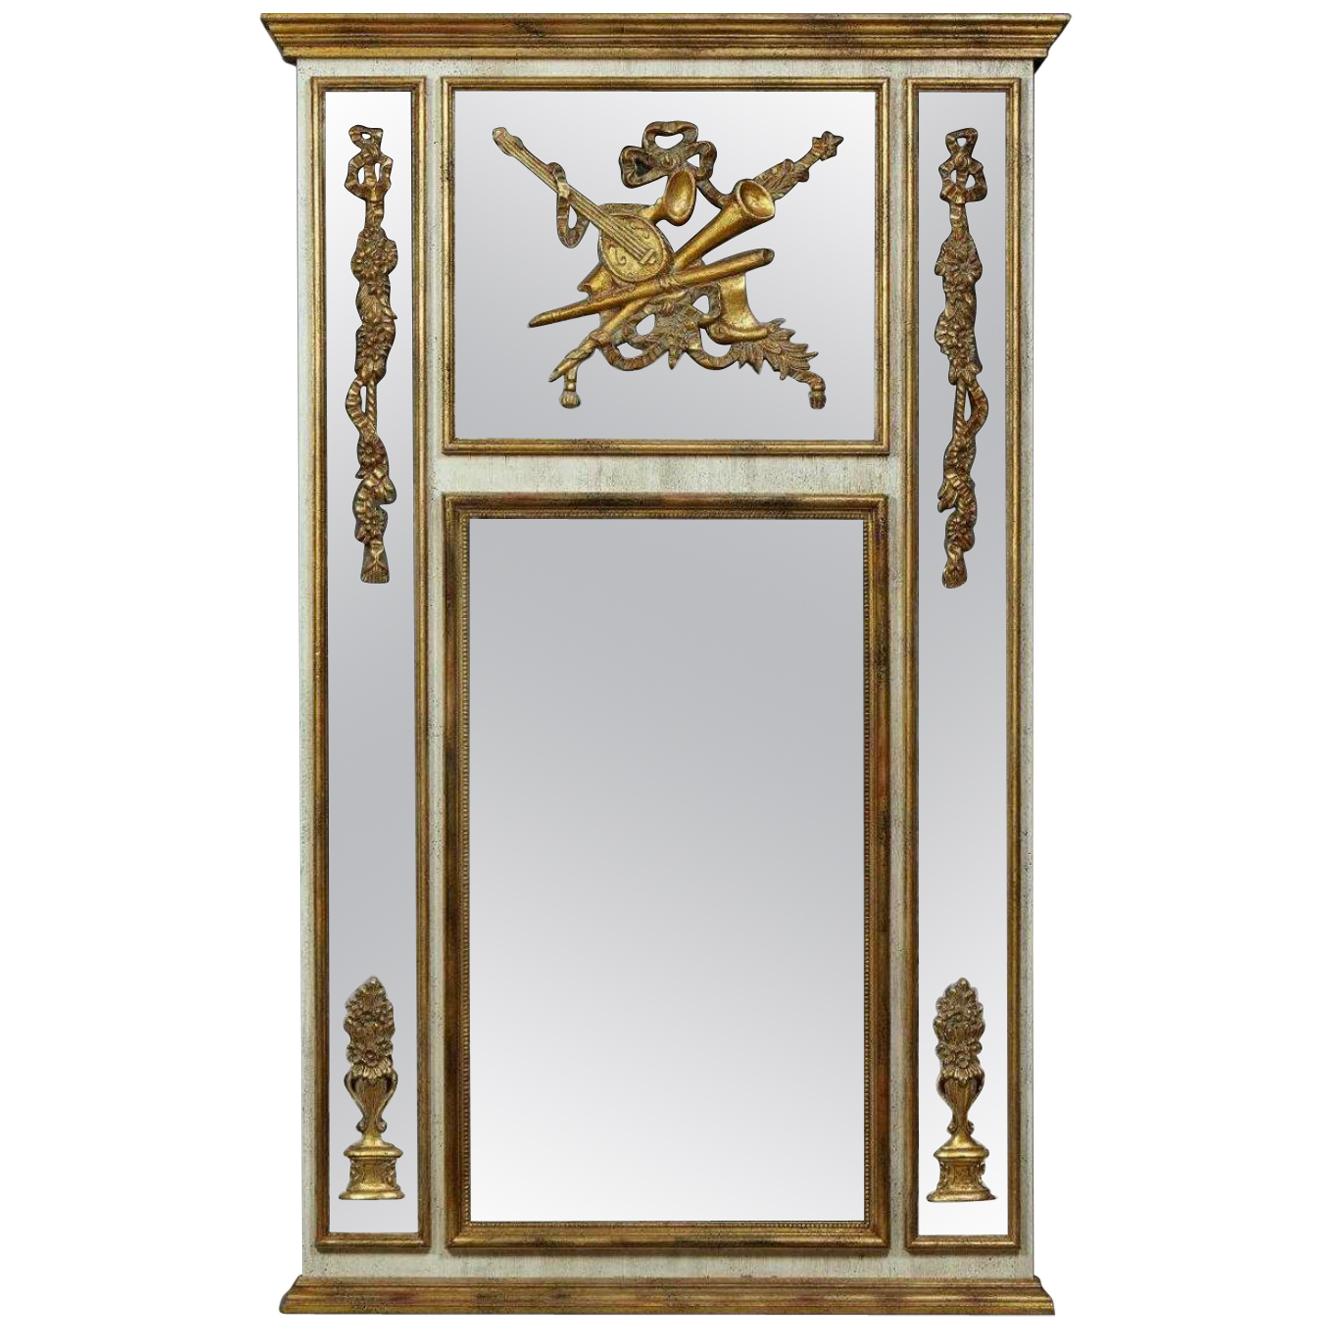 Palatial Louis XVI Style Gilt and Poly-Chromed Wall / Mantle or Console Mirror